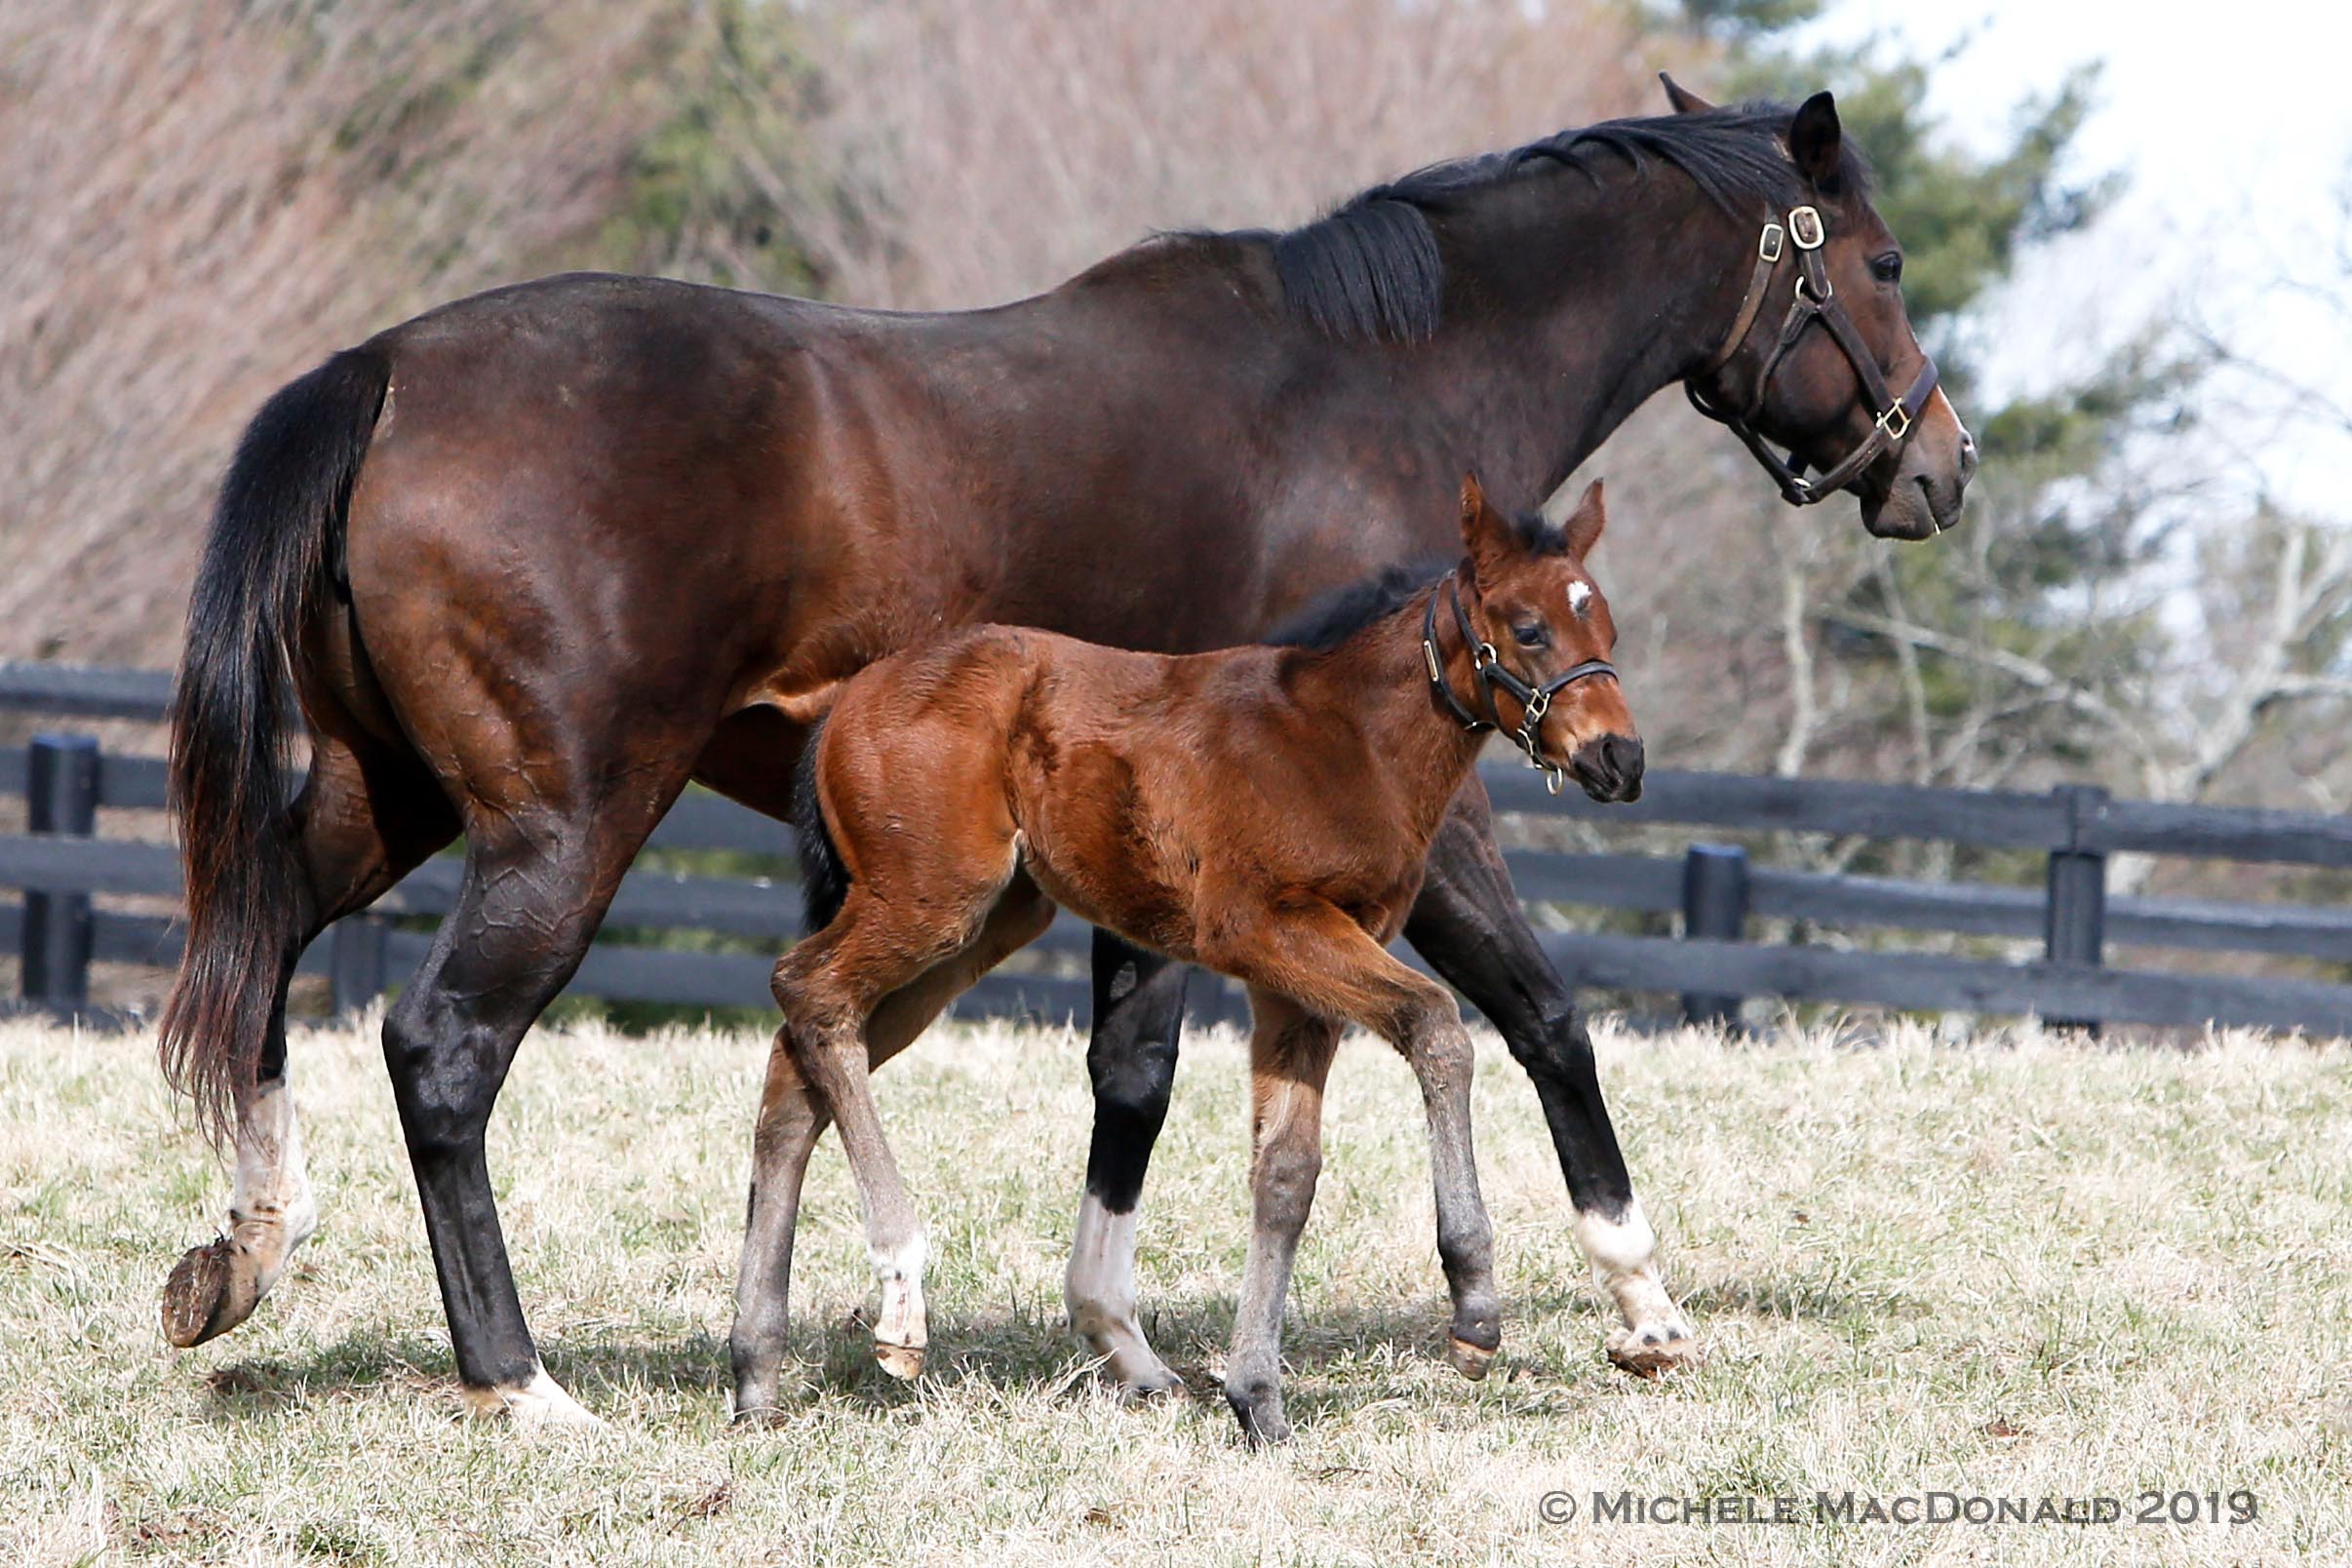 Songbird and her foal: “She hasn’t taken a wrong step,” says breeder Wayne Sweezey. “She’s just a really, really nice foal.” Photo: Michele MacDonald